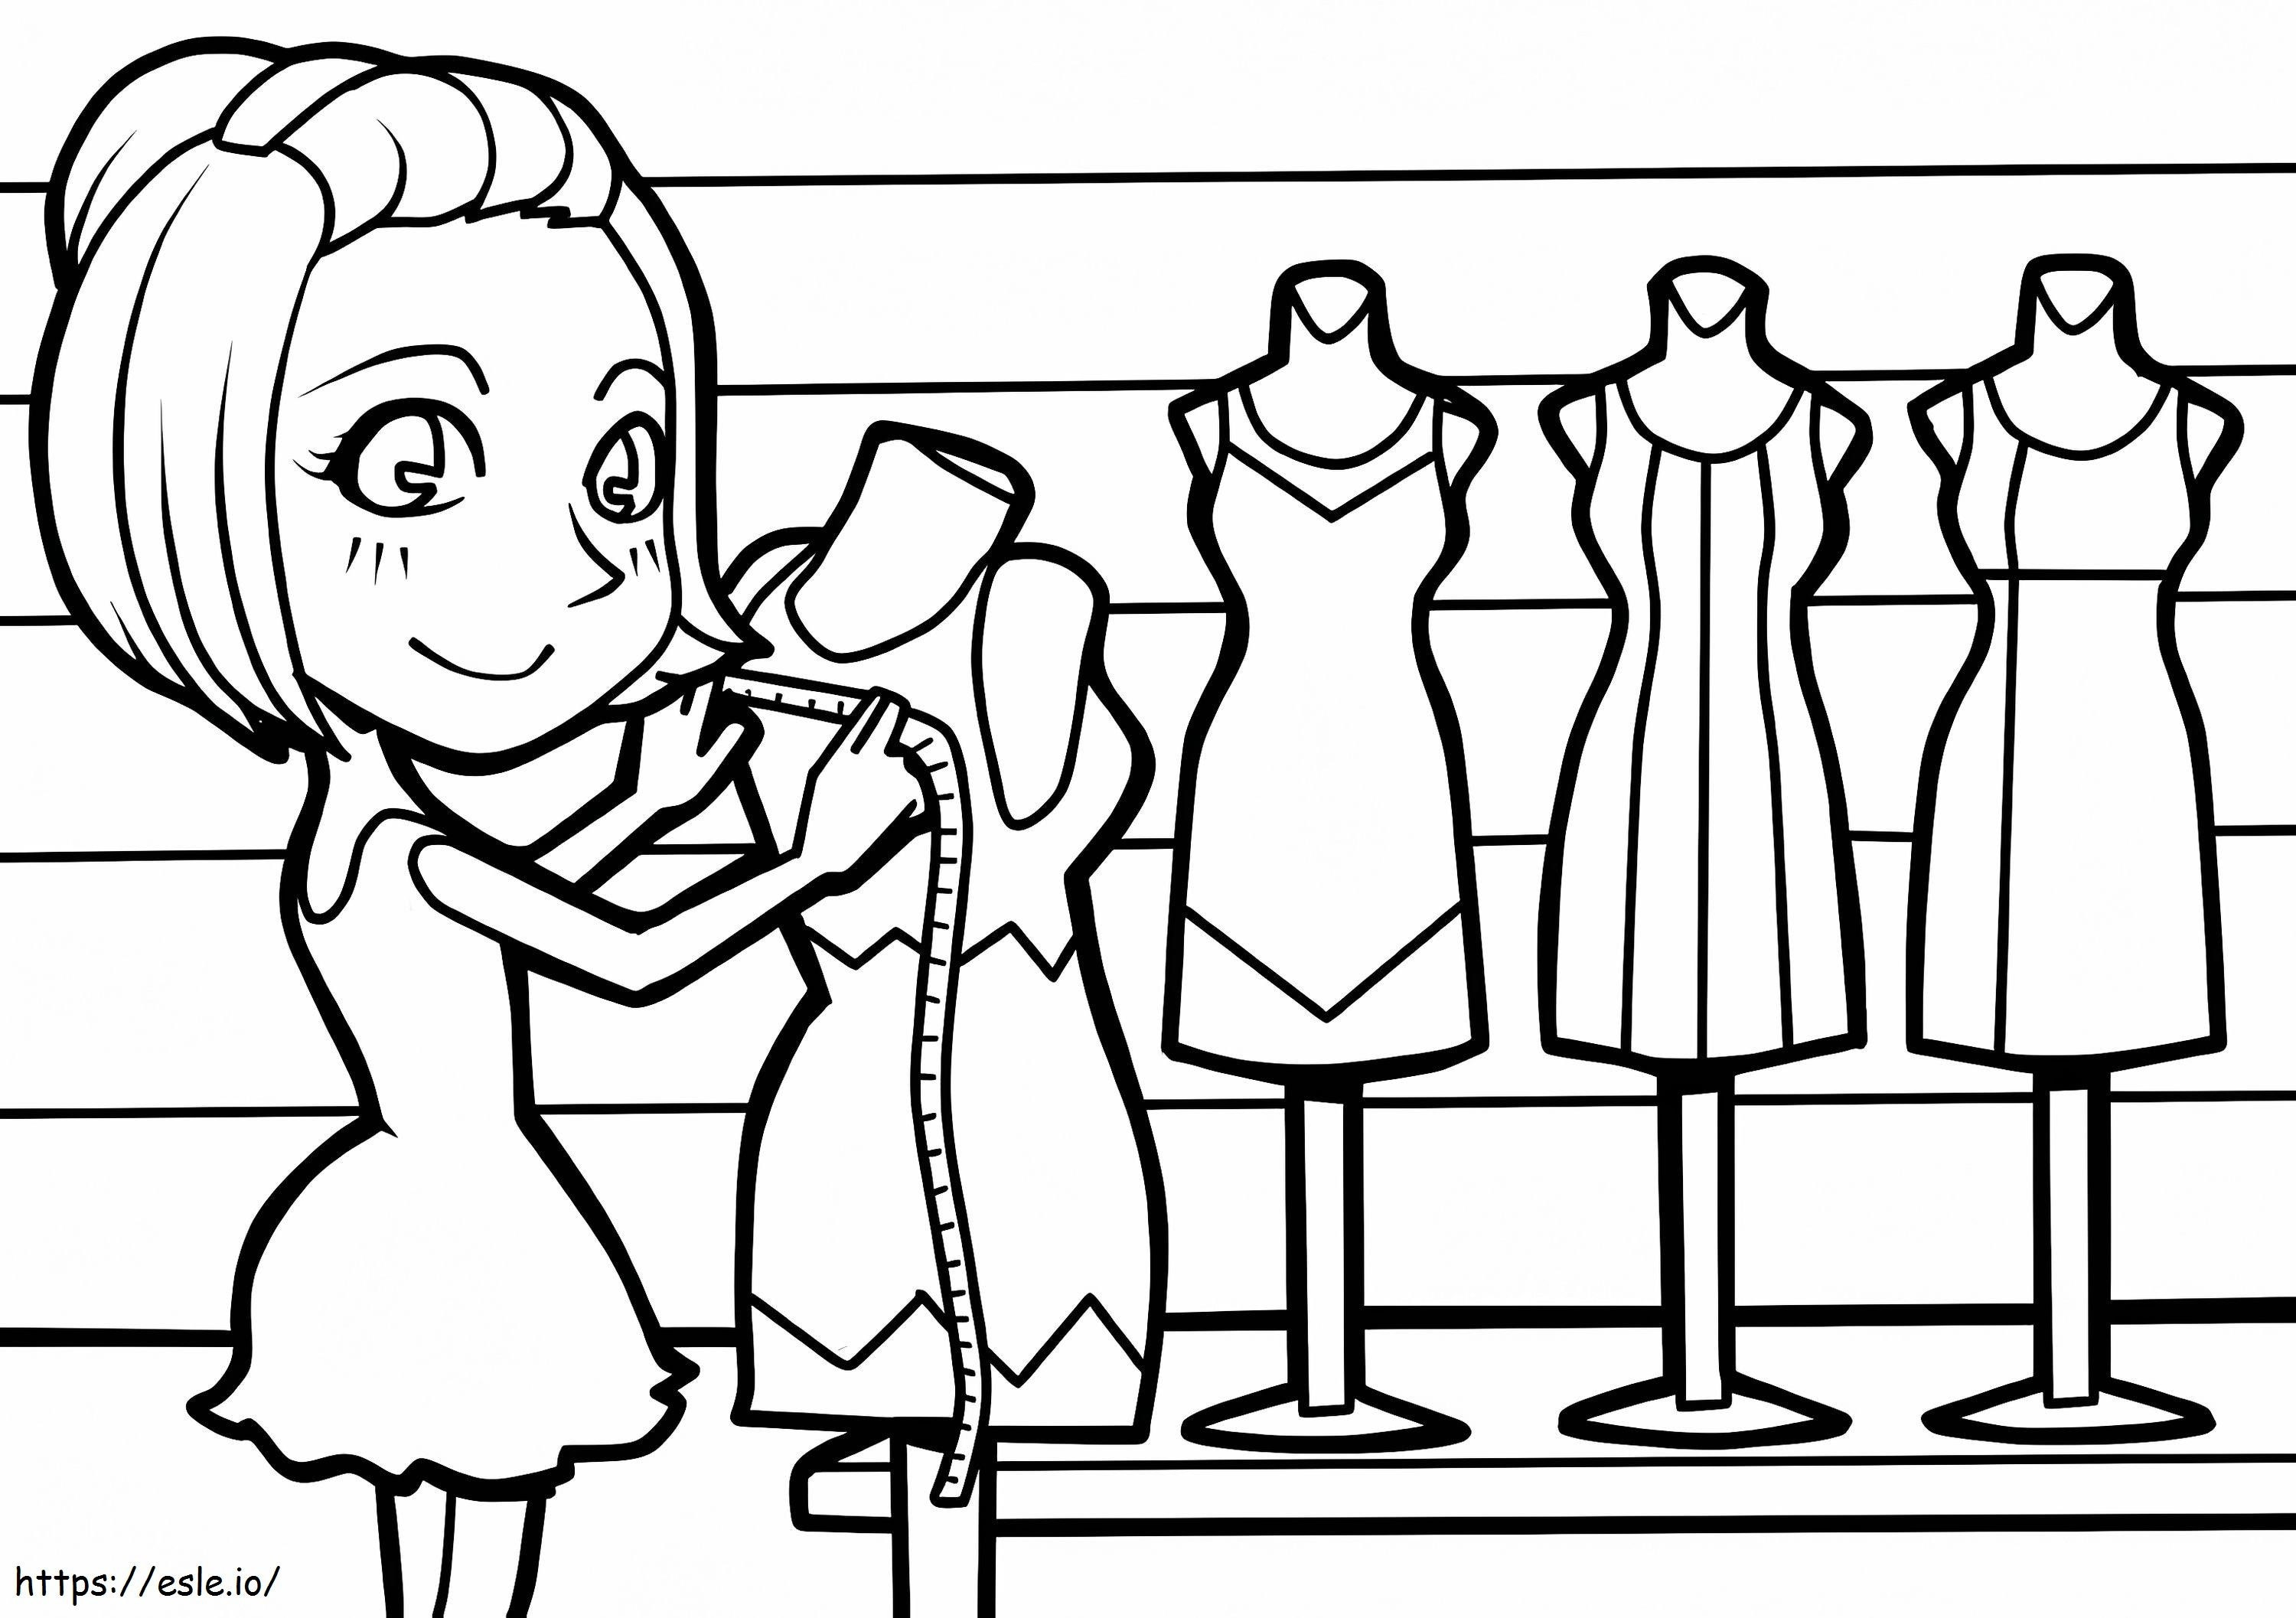 Tailor 3 coloring page